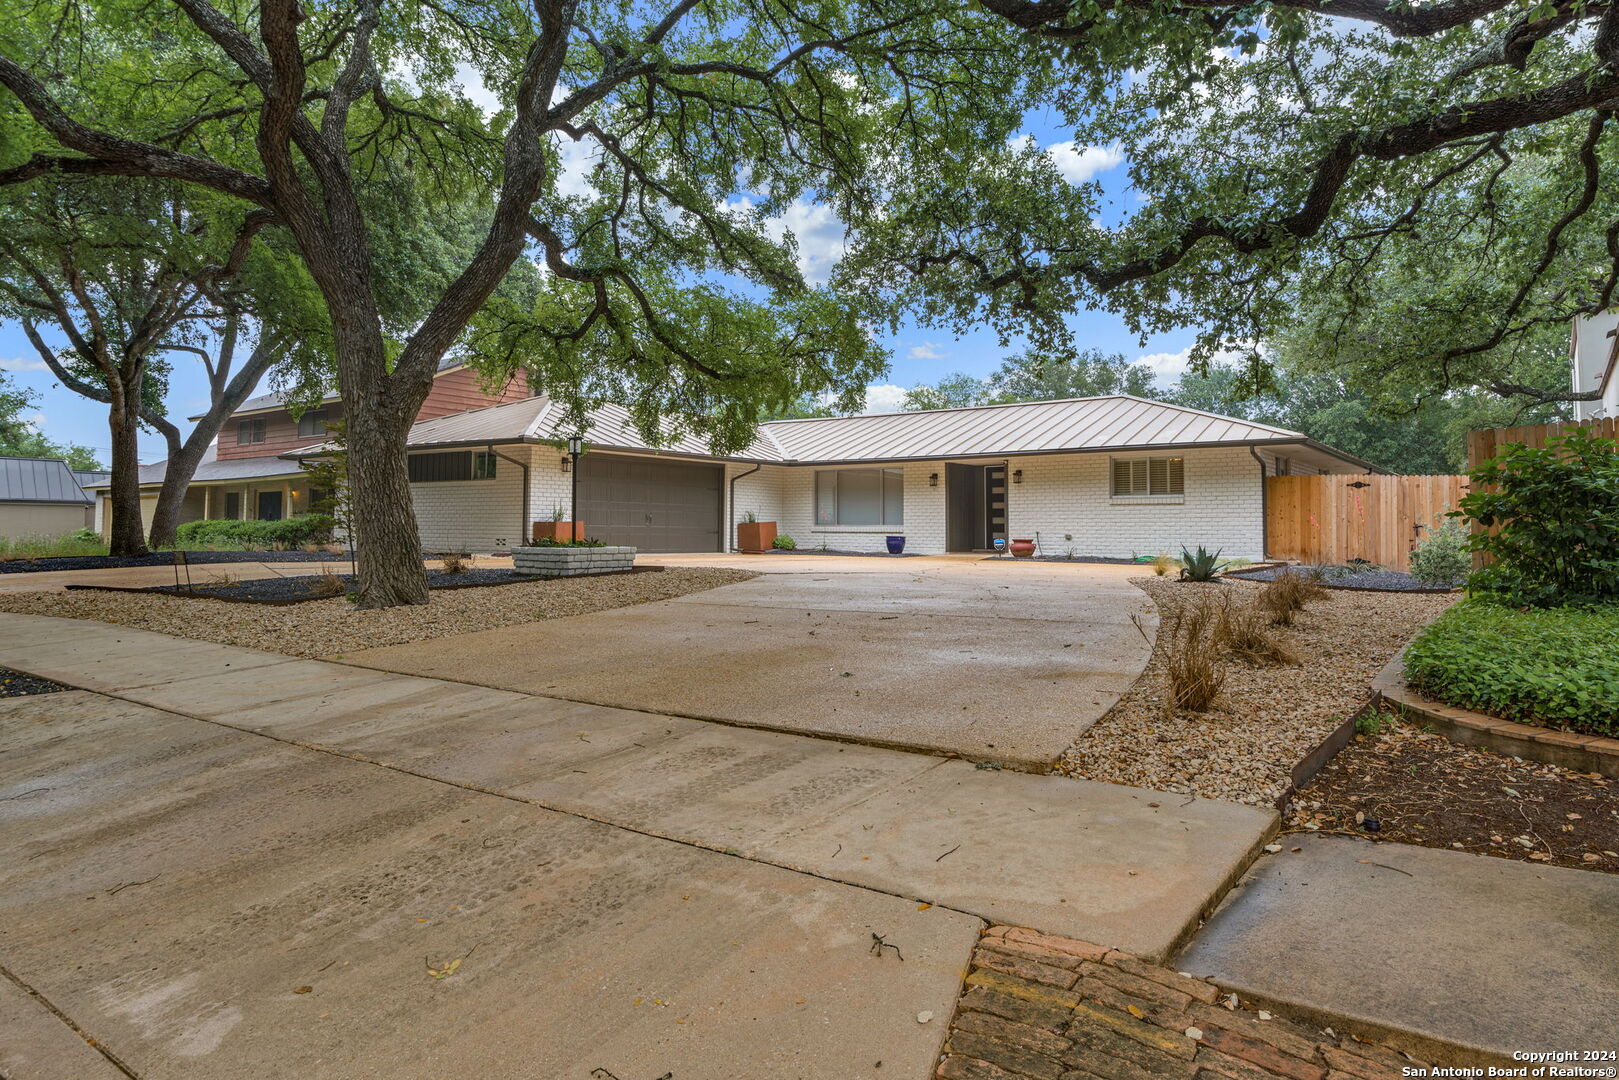 front view of house with a street